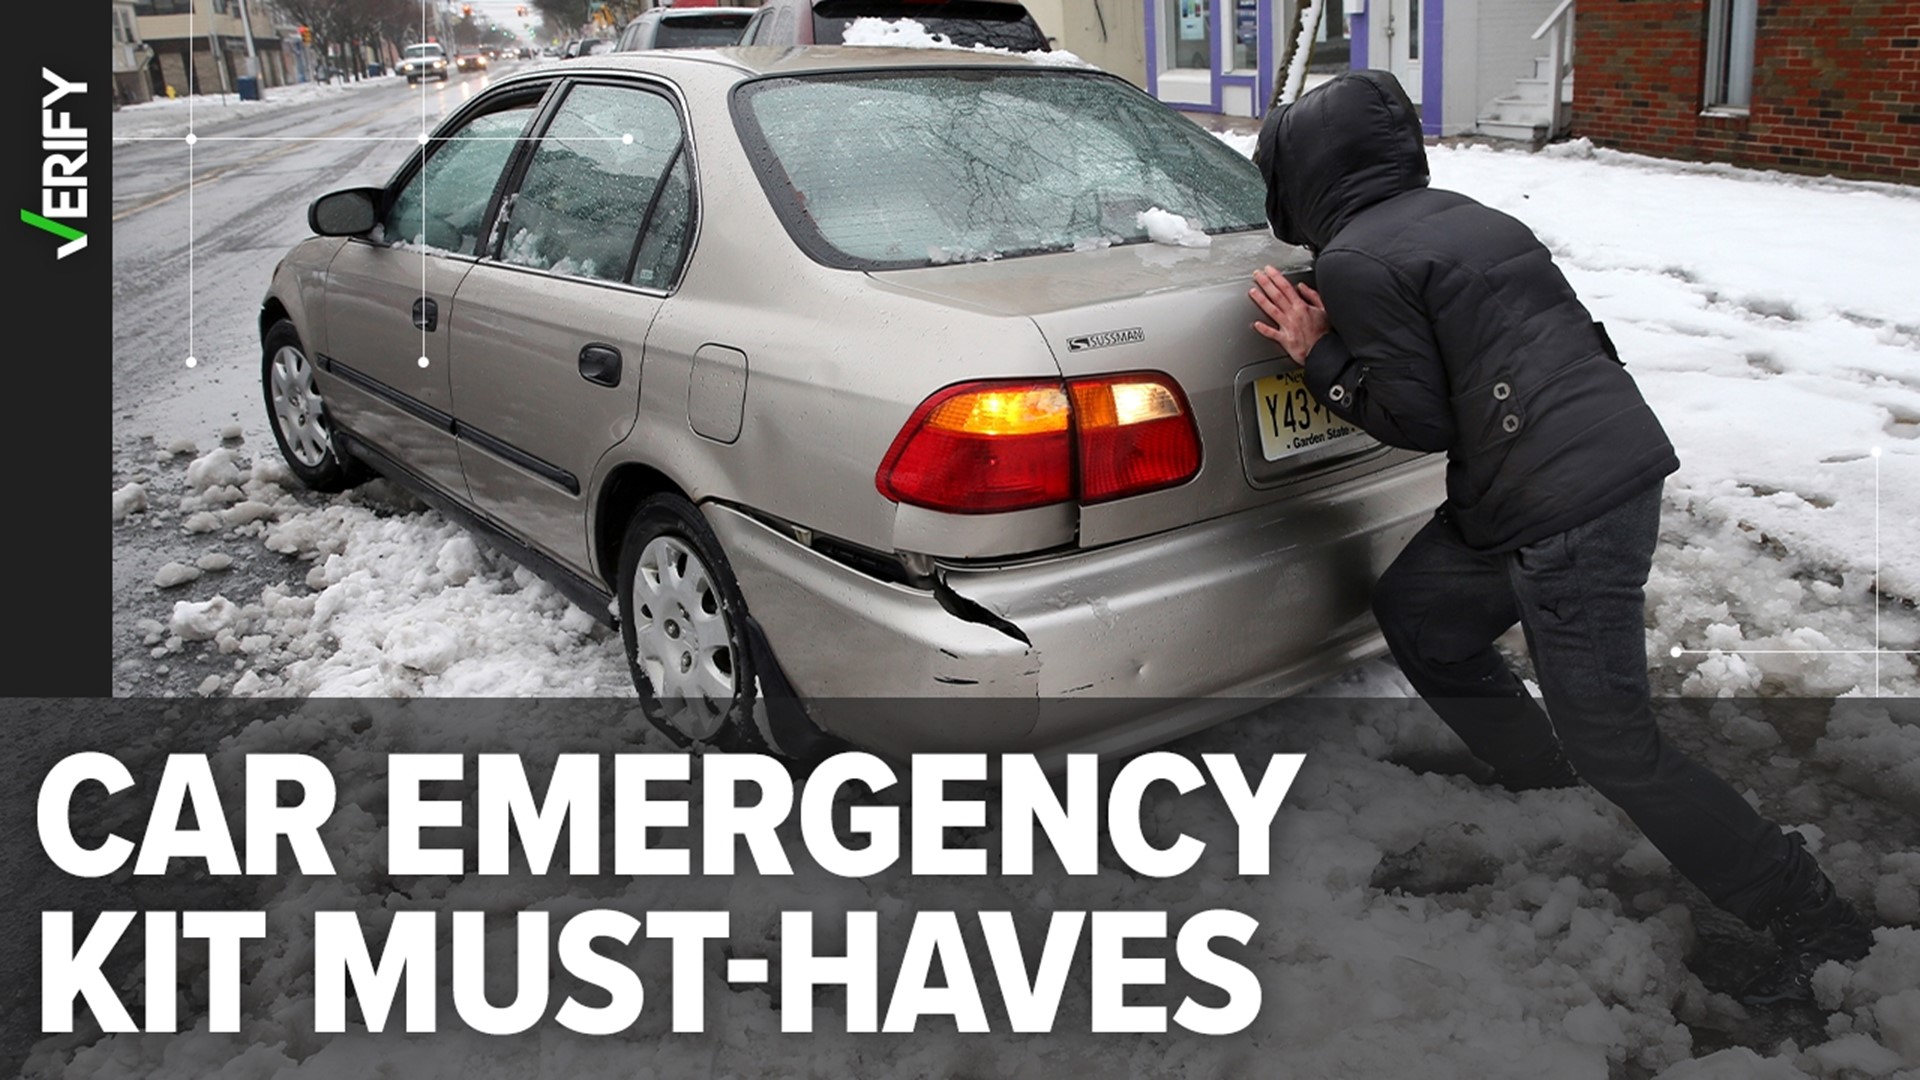 Here’s a VERIFIED list of items you need to create an emergency winter supply kit for your car.